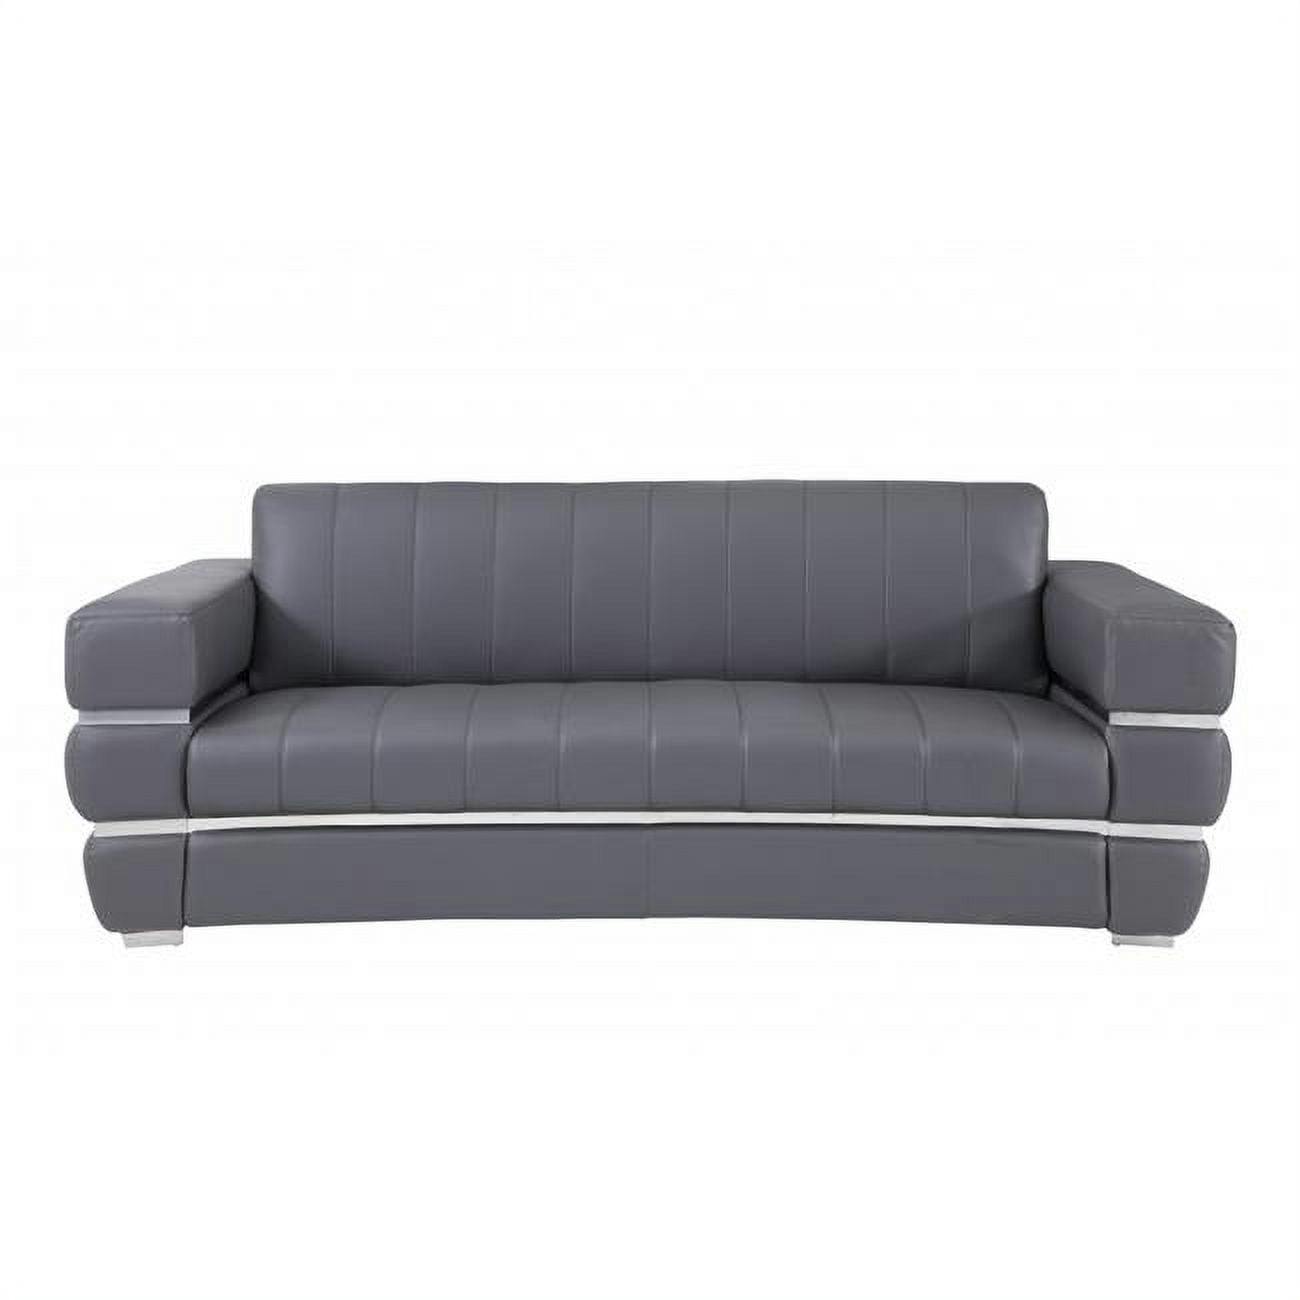 Luxurious Dark Gray Top Grain Leather Sofa with Chrome Accents, 89''